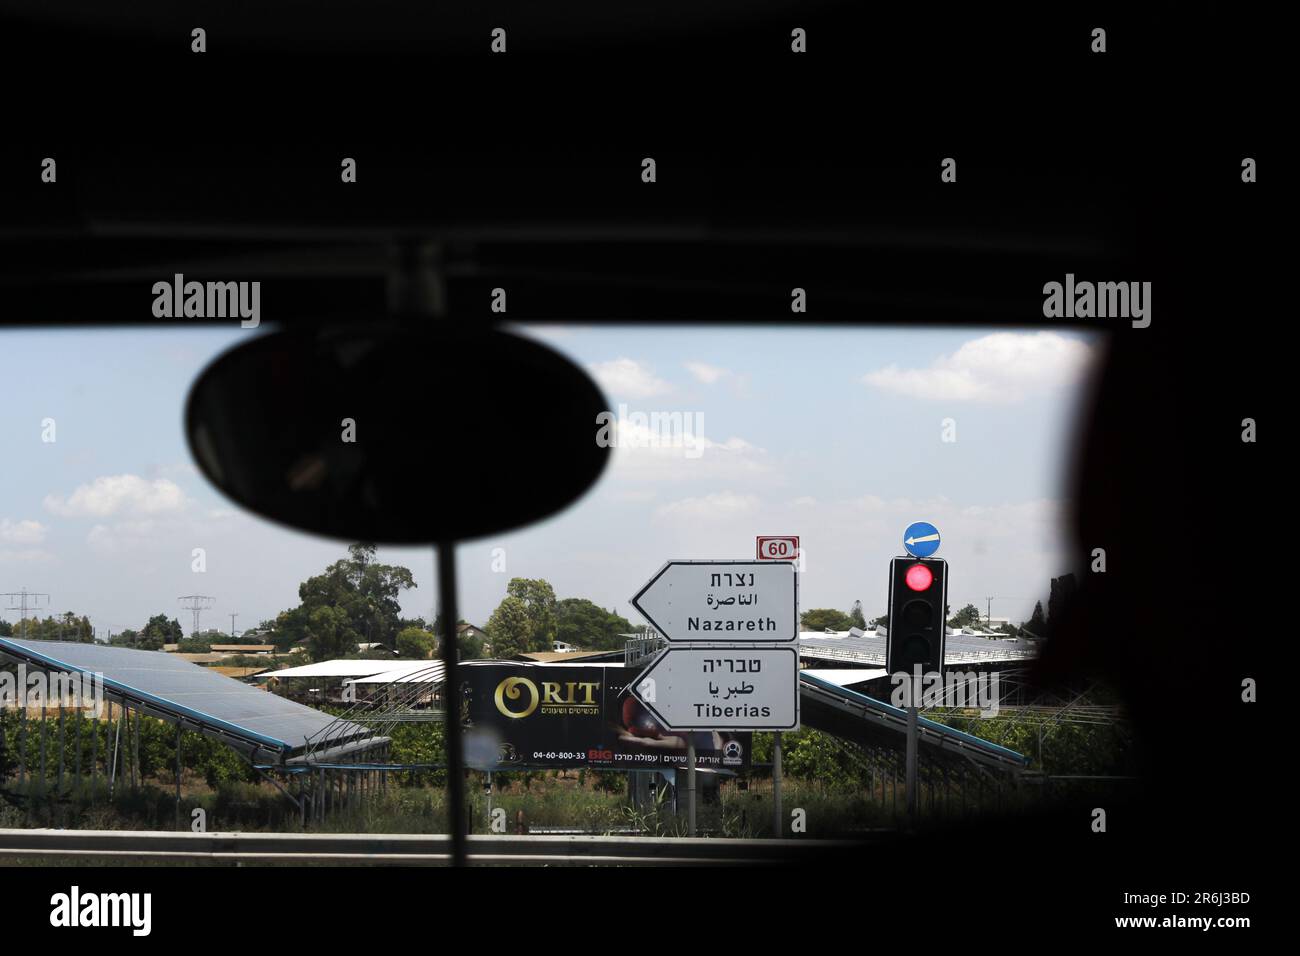 An intersection on Highway 60 as seen from inside a bus on the way to Nazareth, Israel. Stock Photo